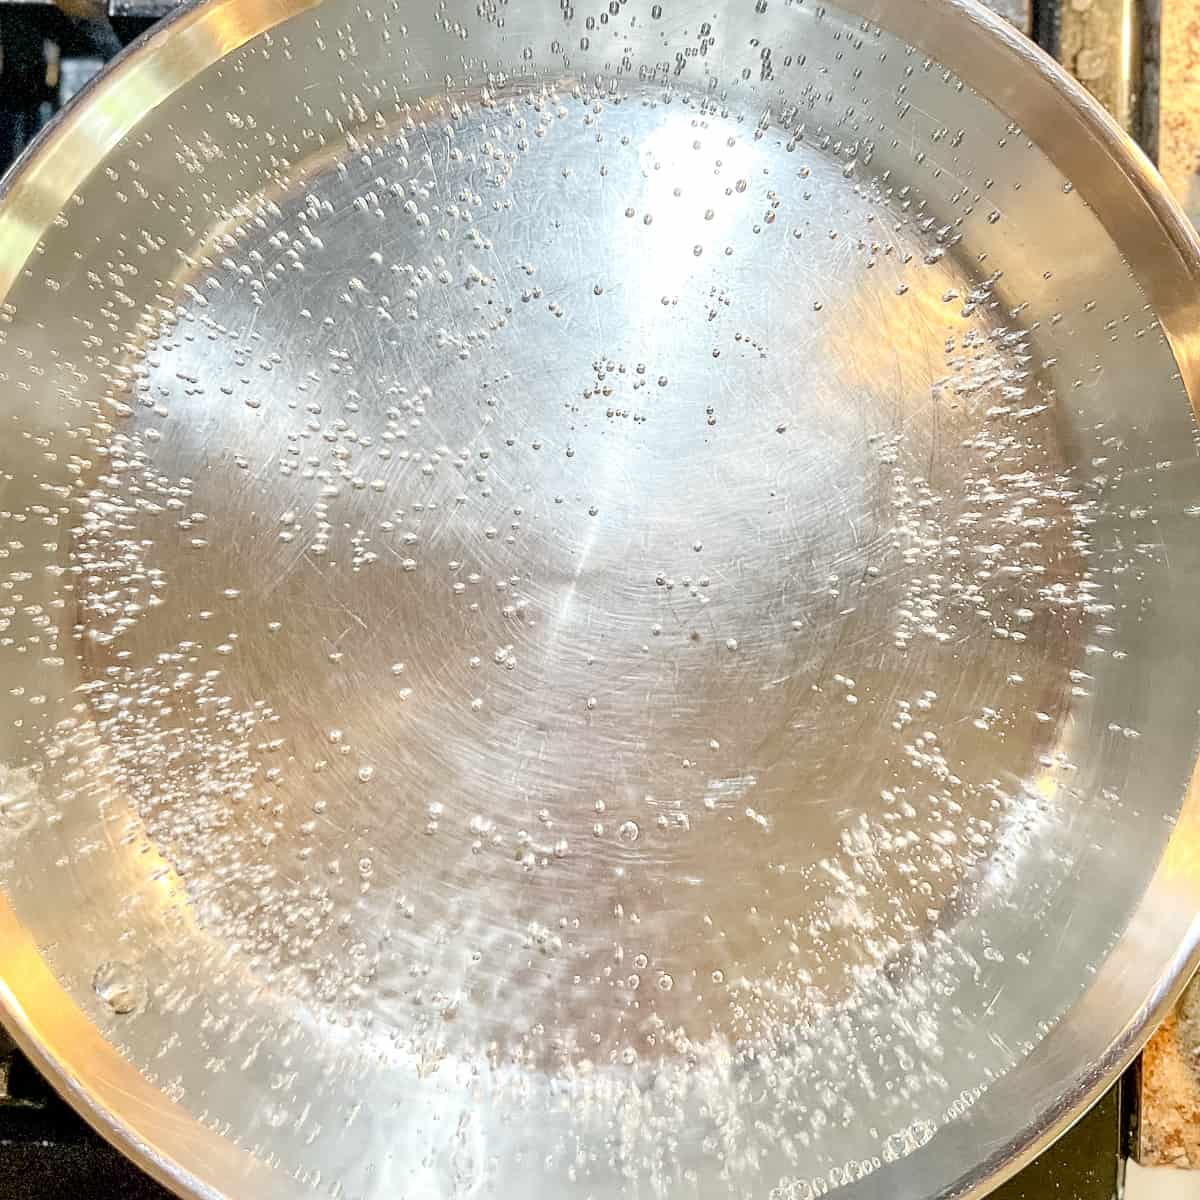 simmering water in a stainless steel skillet.